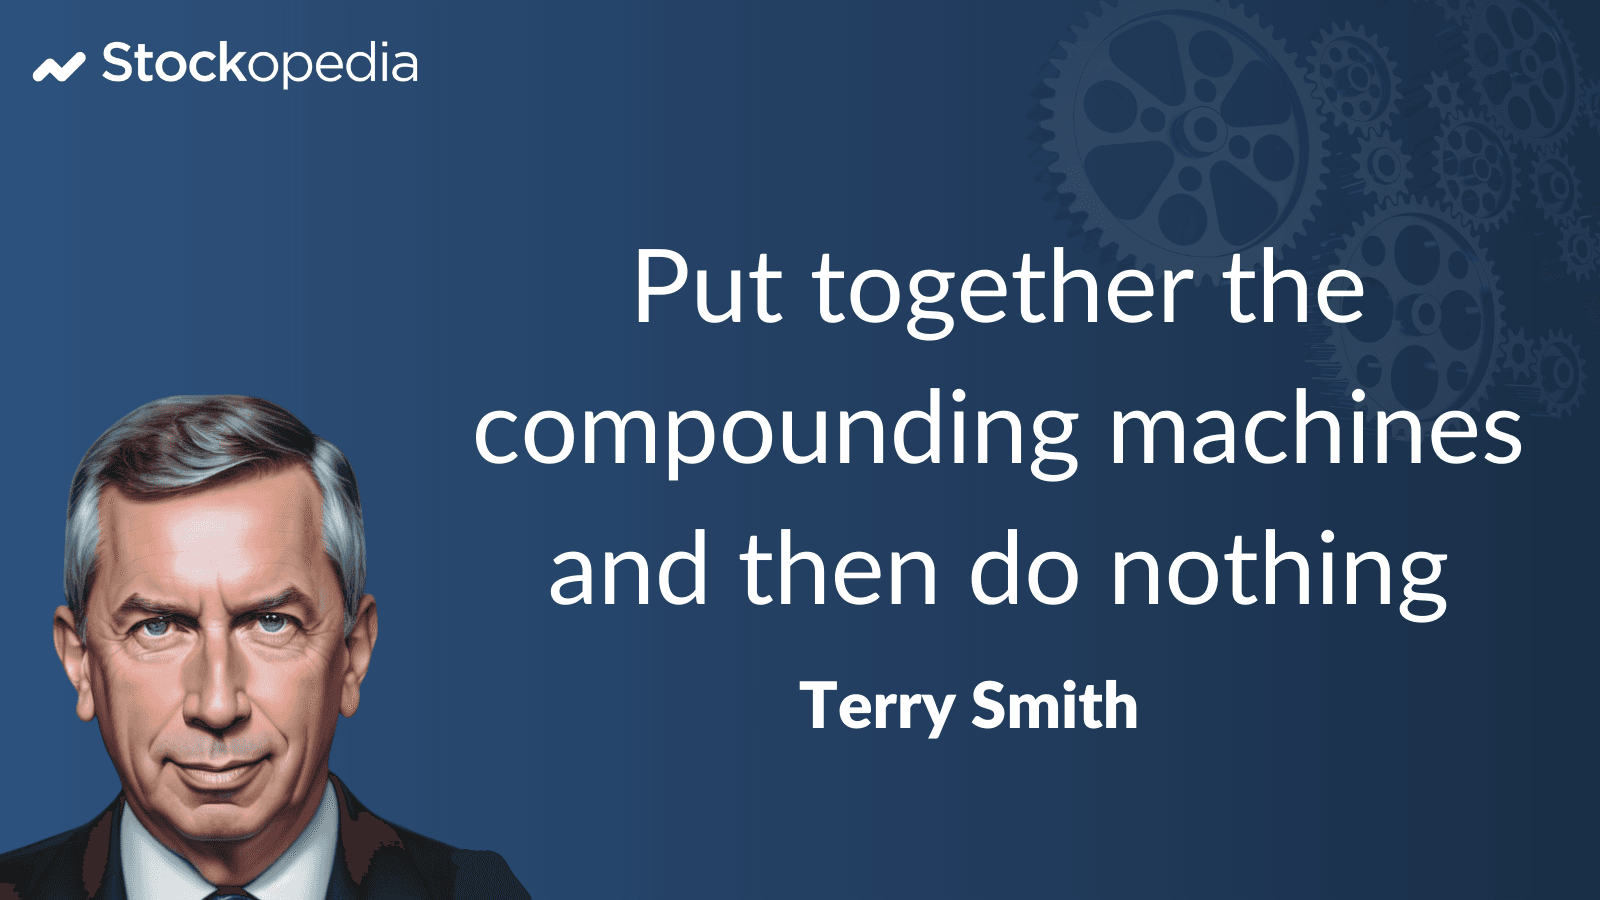 Quote - Terry Smith - Compounding